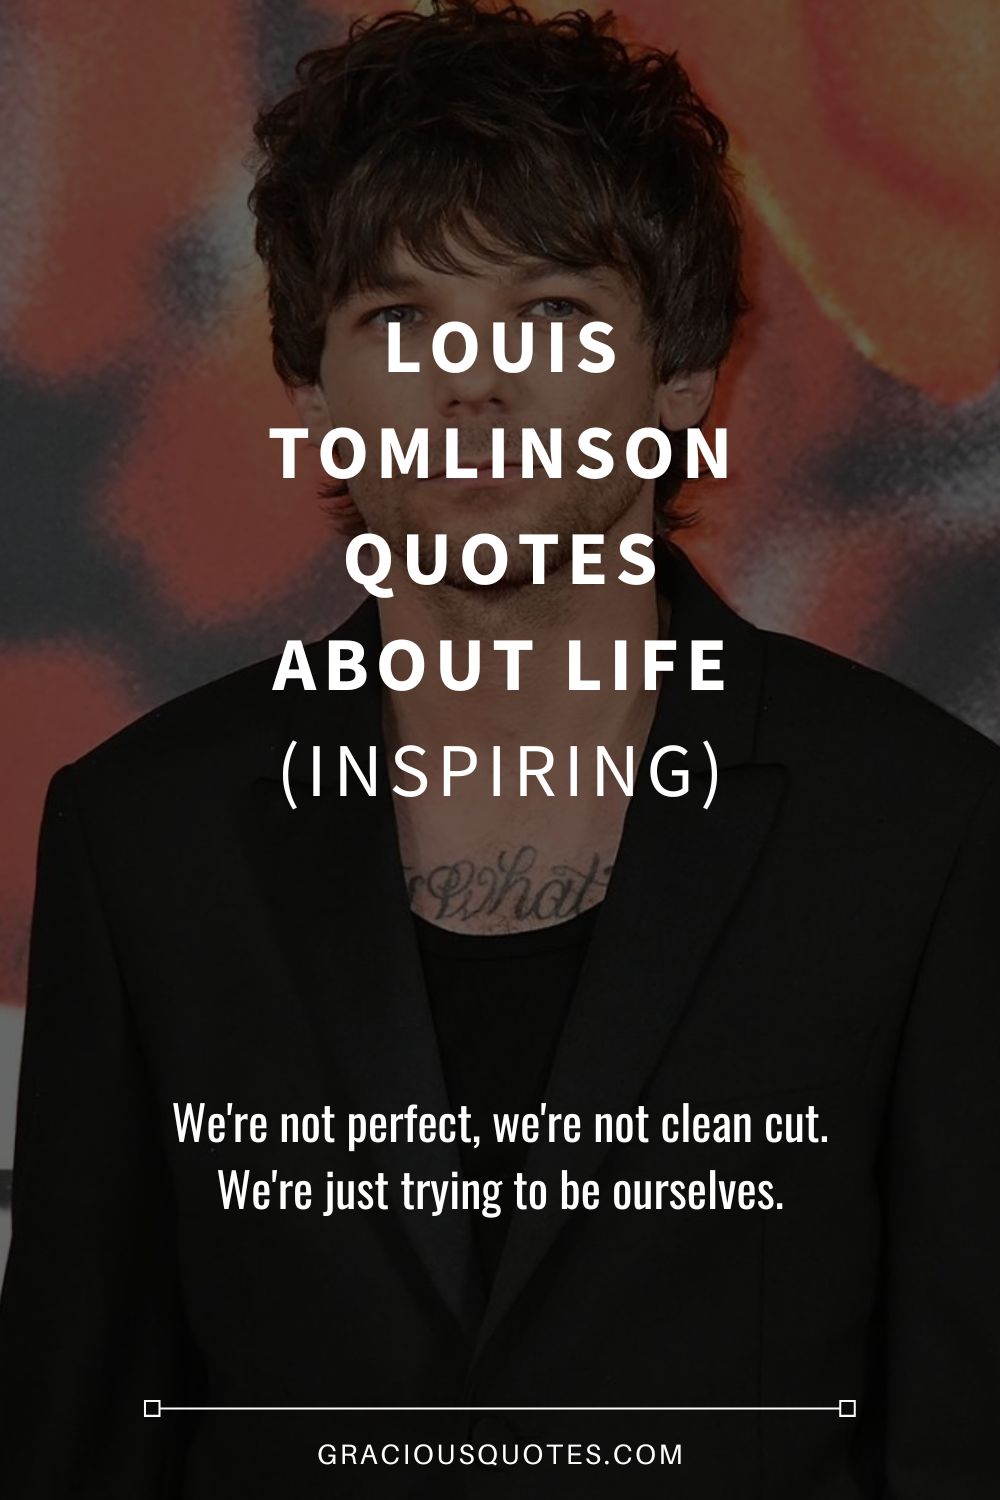 louis tomlinson quotes live life for the moment